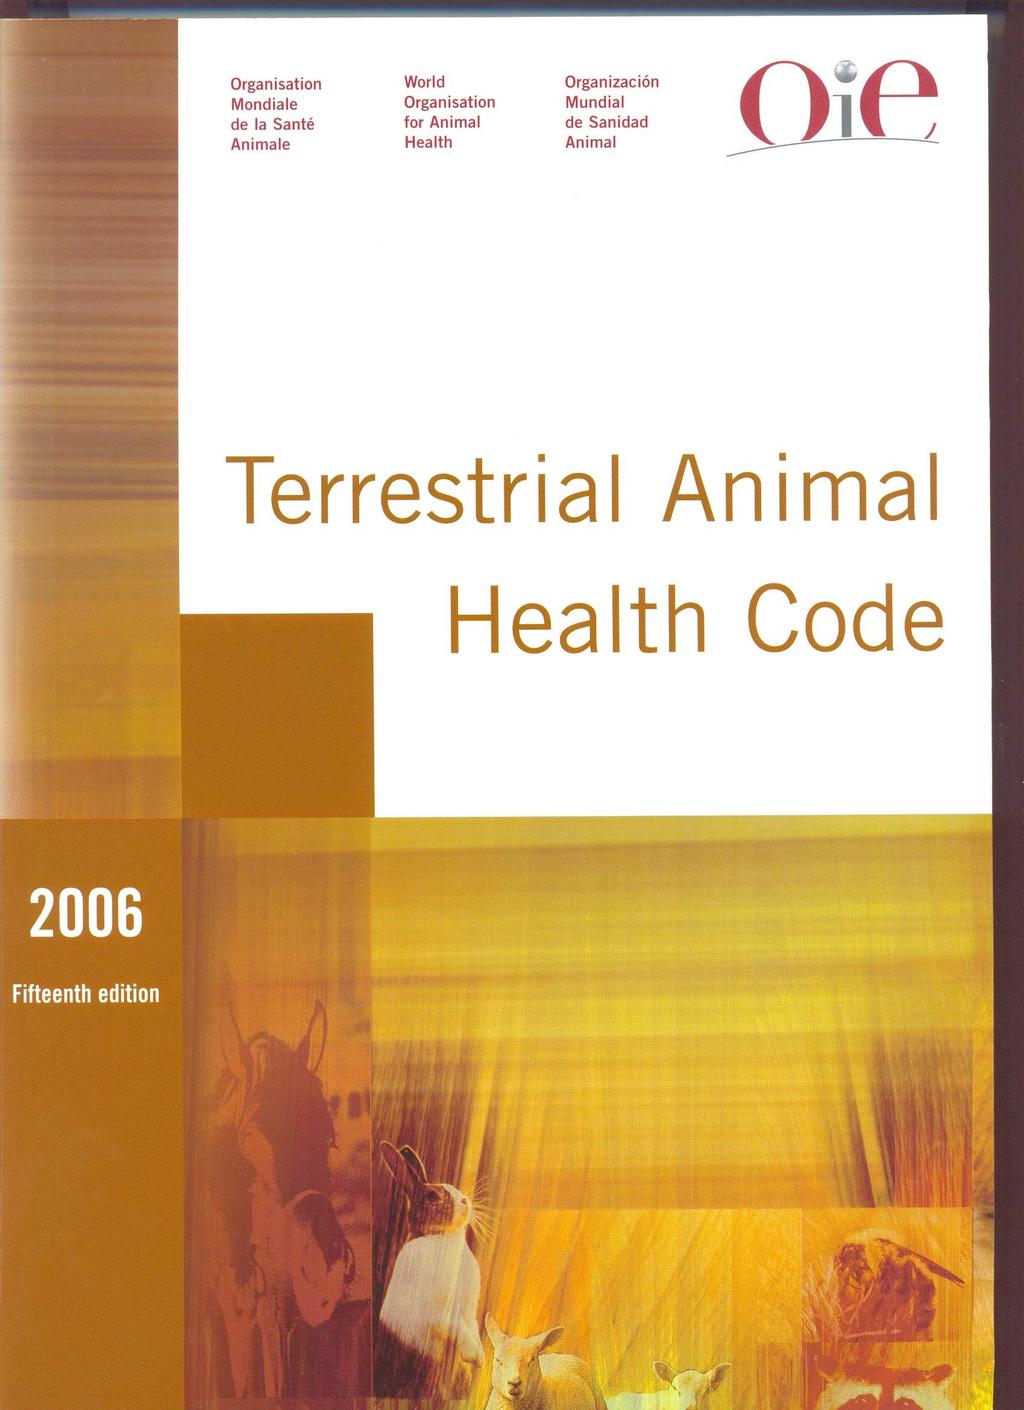 TERRESTRIAL ANIMAL CODE To facilitate trade in Animals & products while avoiding unjustified